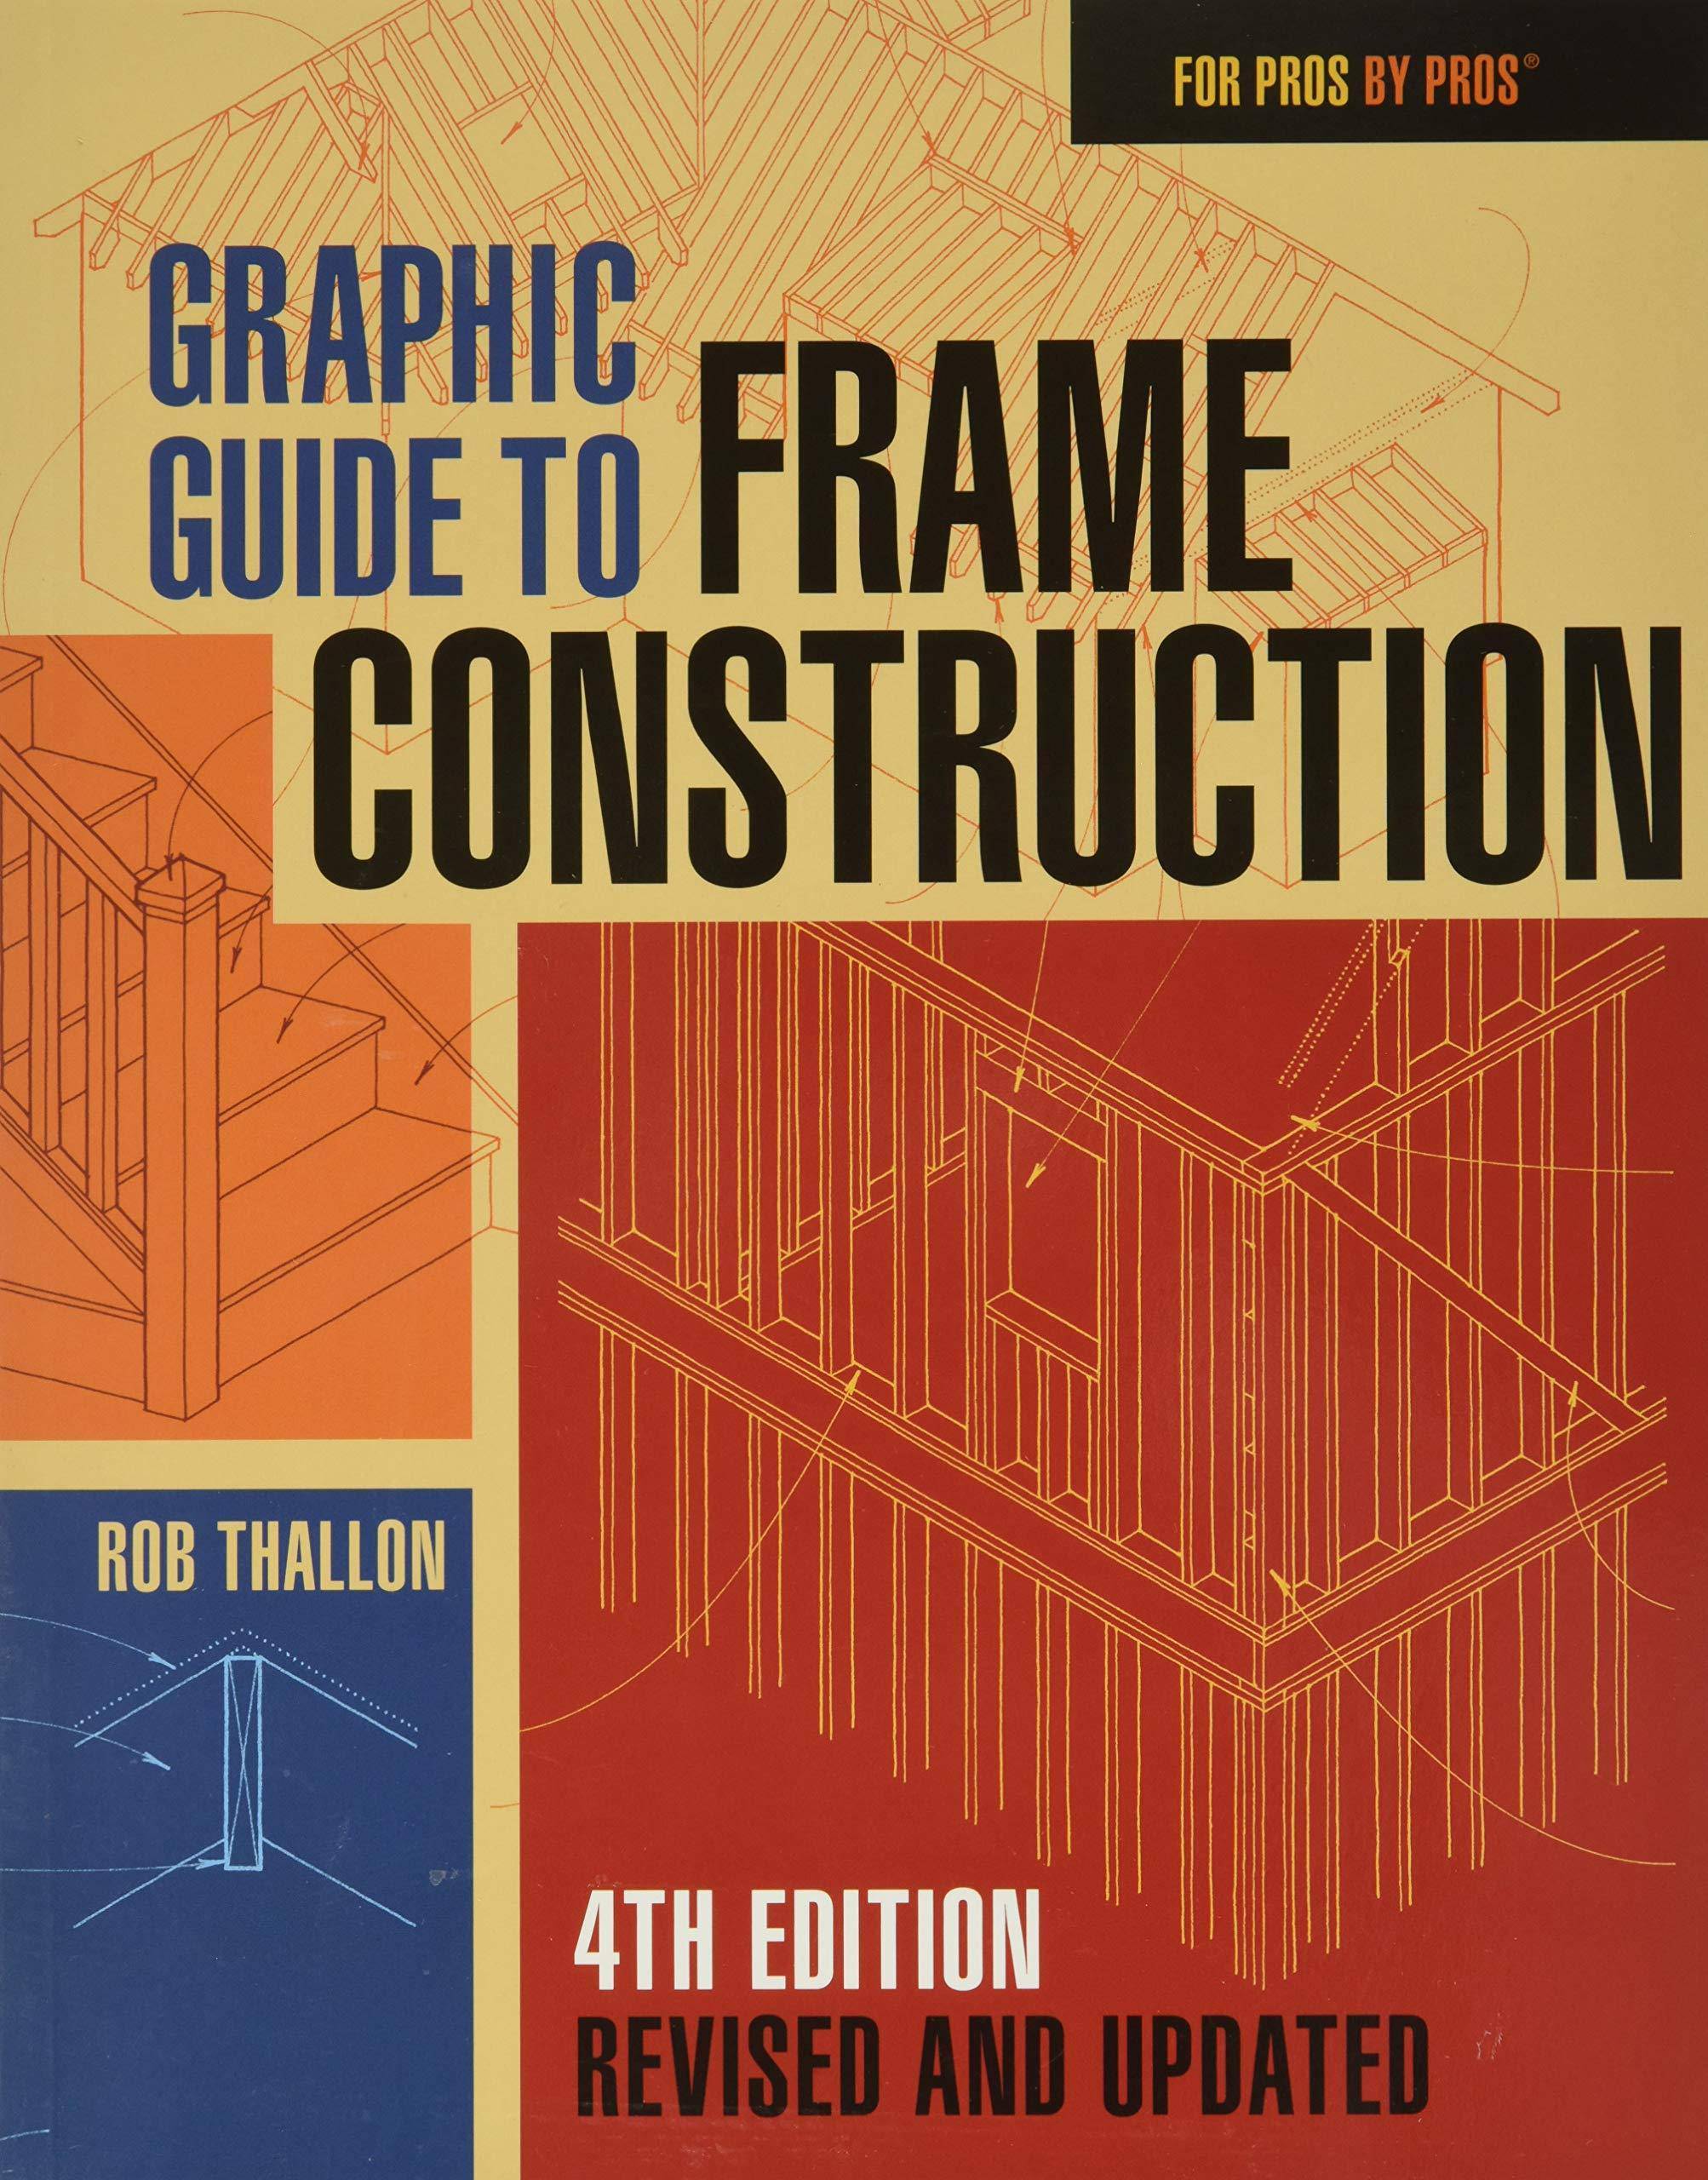 Graphic Guide to Frame Construction - SureShot Books Publishing LLC